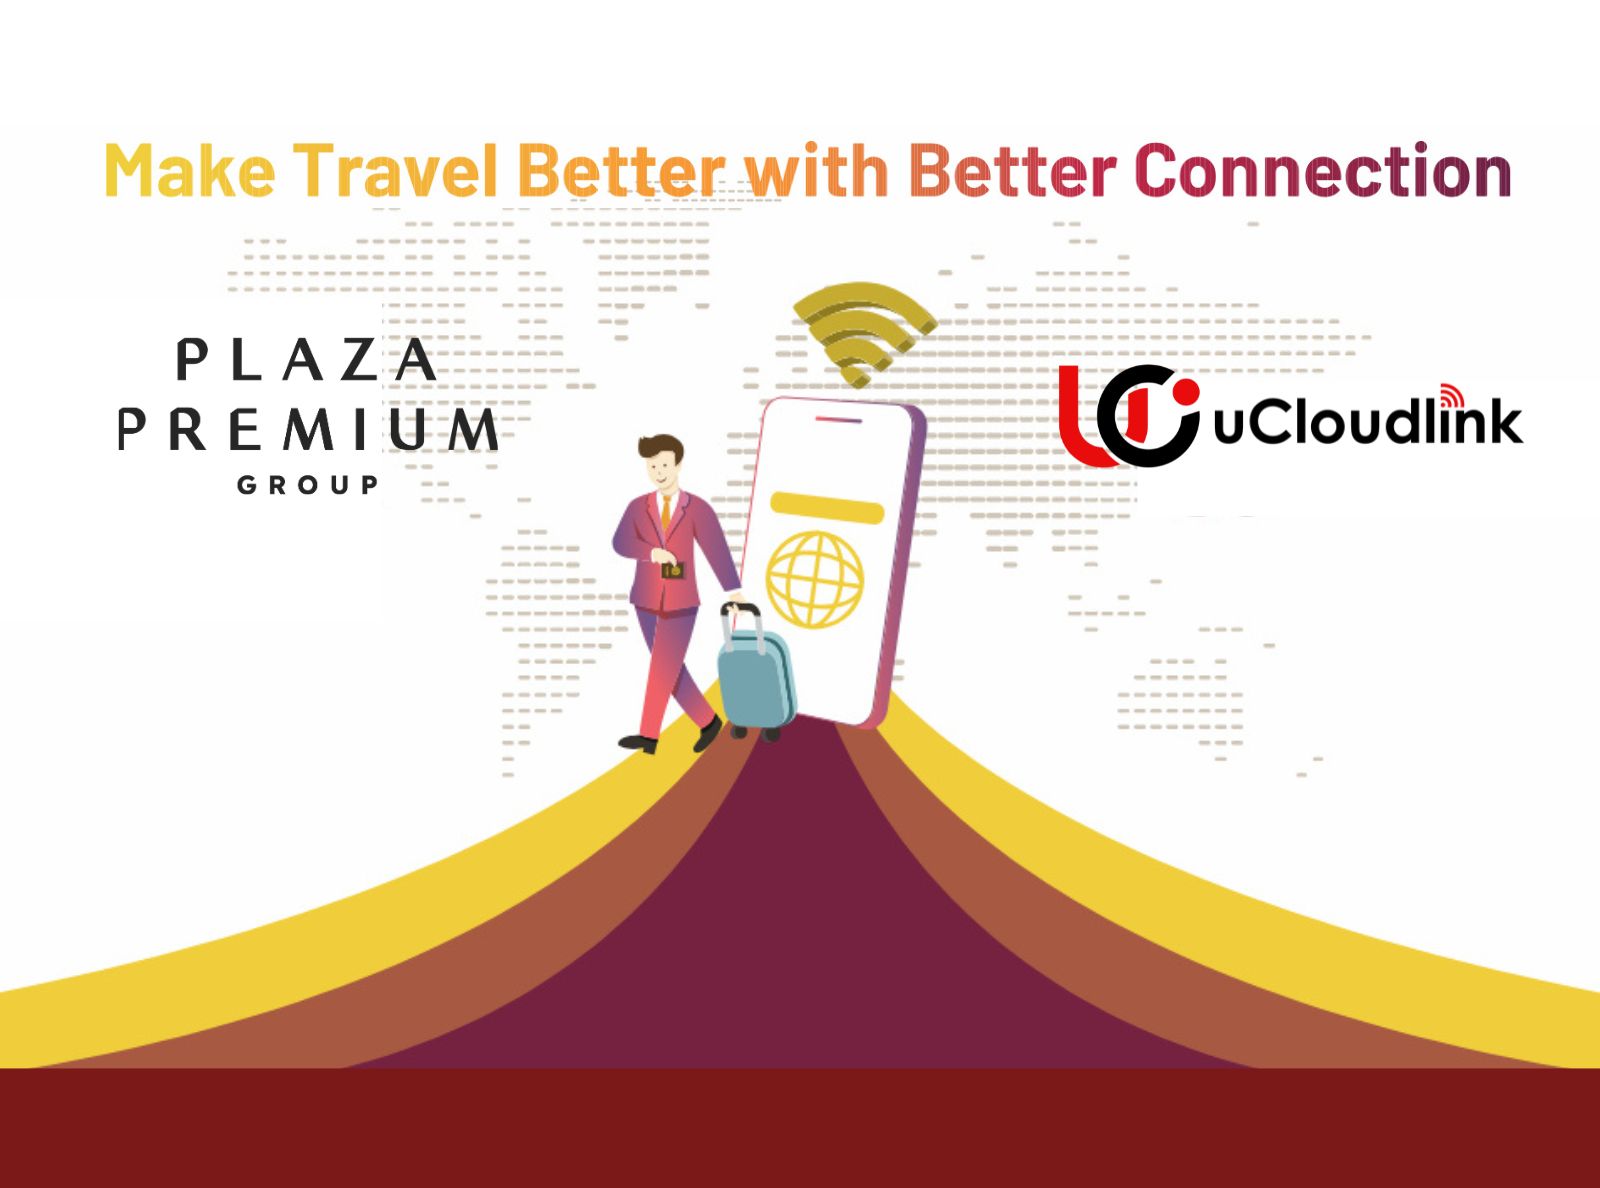 uCloudlink Group Inc. and Plaza Premium Group to Co-Exhibit at 'Travel Meet Asia' to Optimize Travel Connectivity